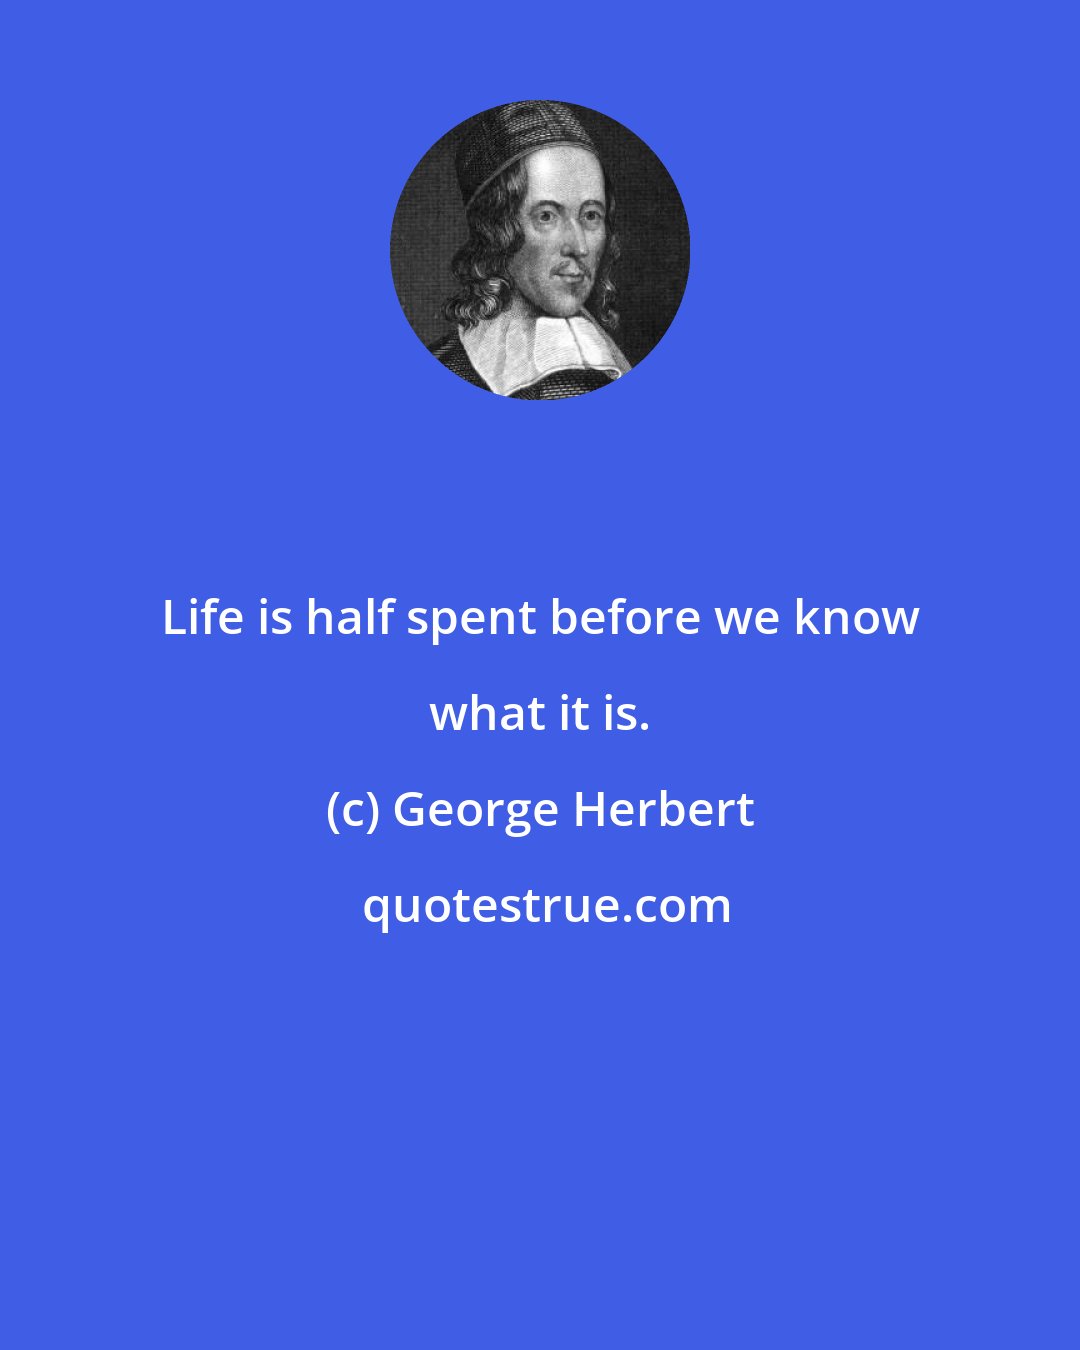 George Herbert: Life is half spent before we know what it is.